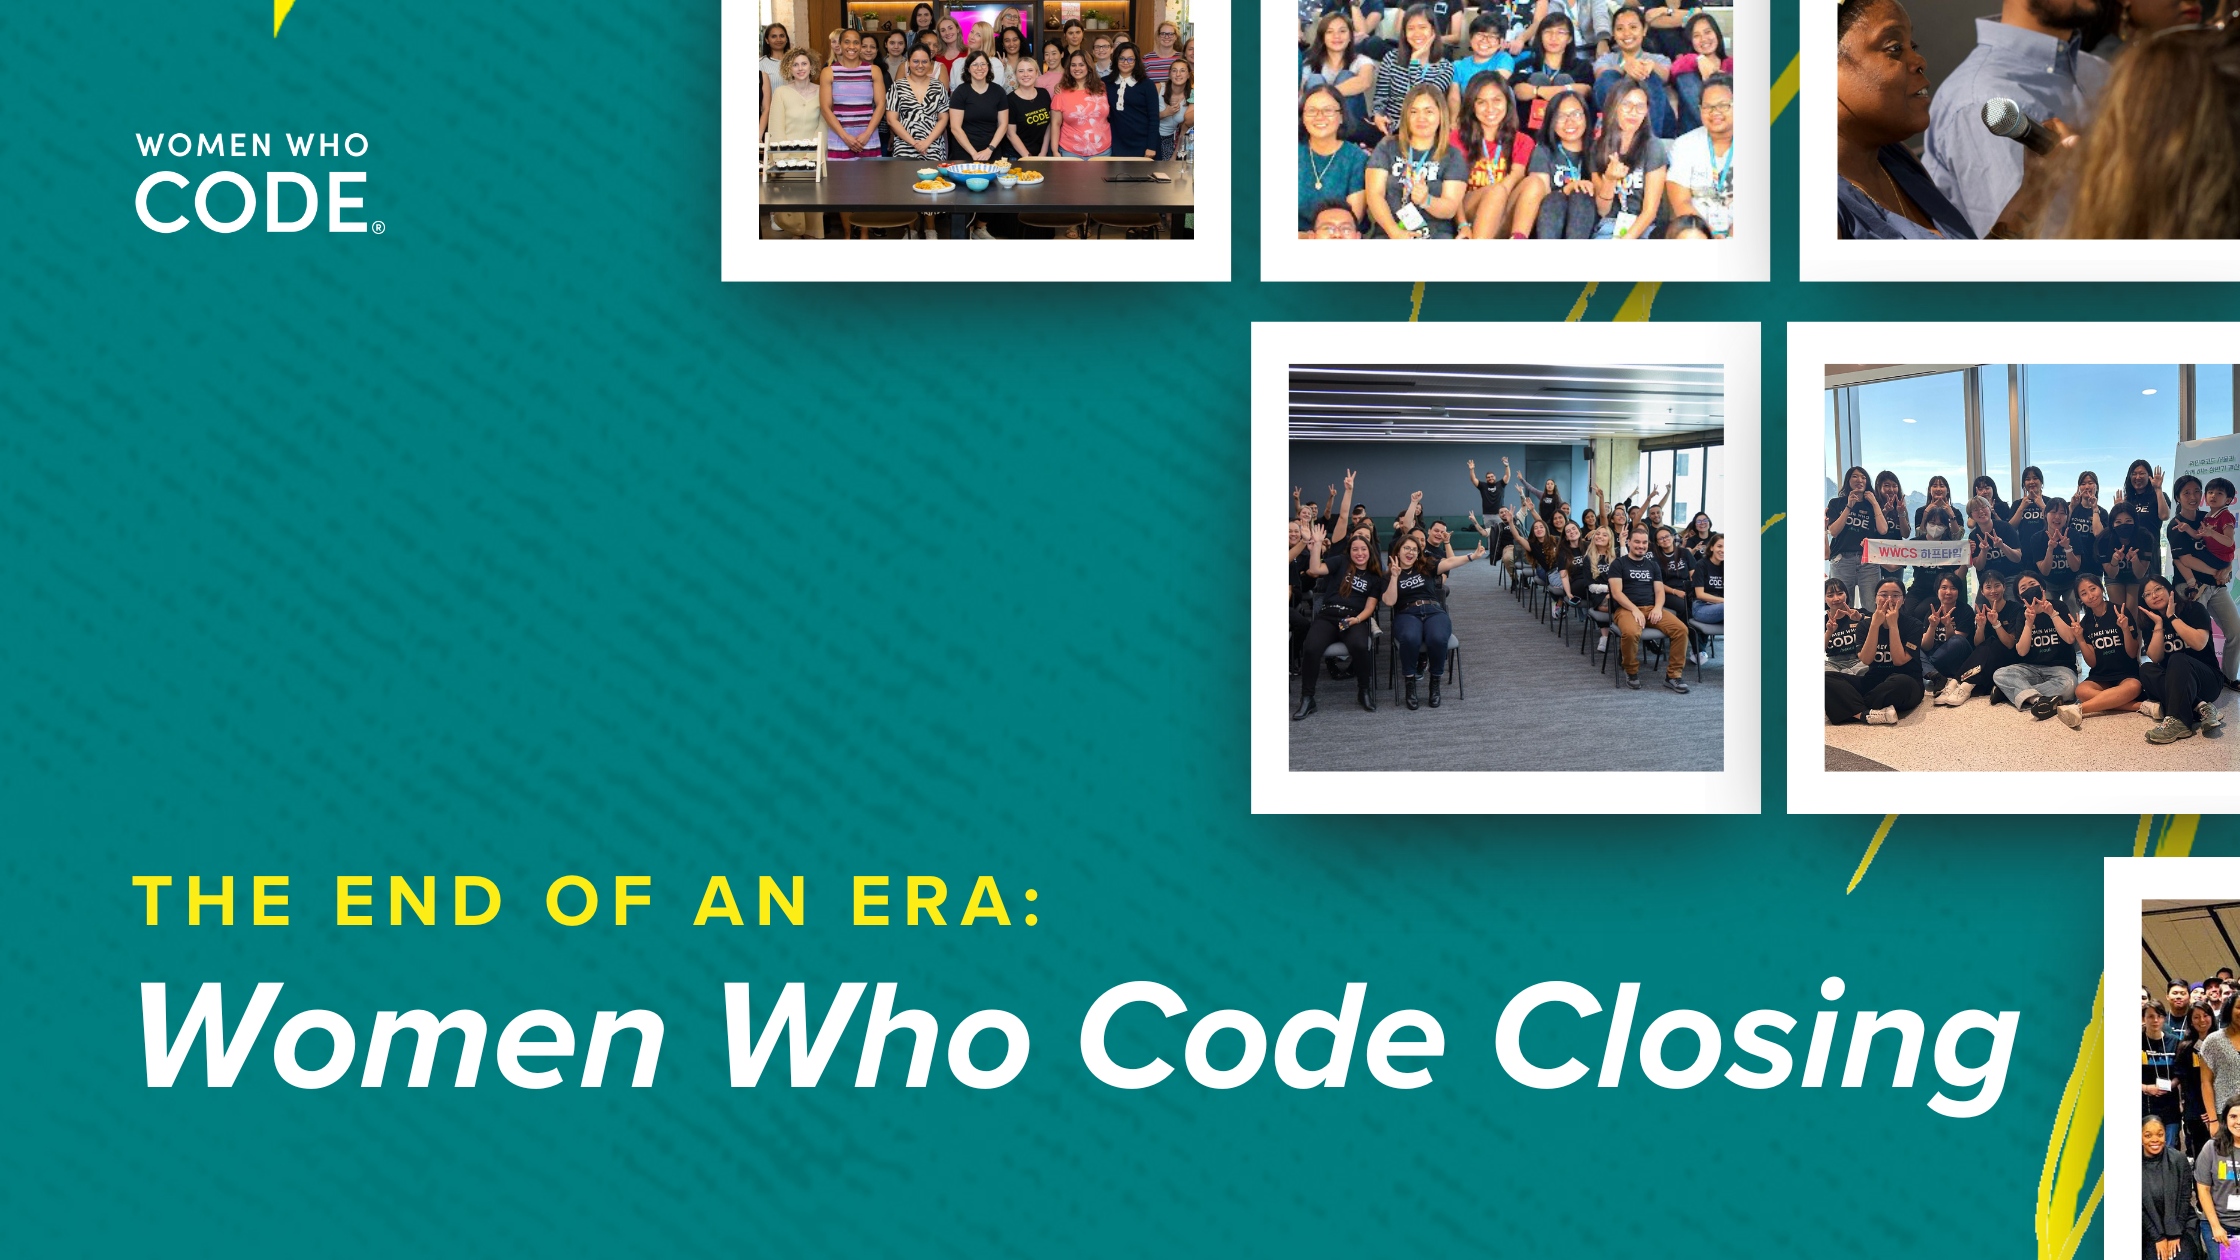 Women Who Code started as a community group in 2011 by a small team of engineers in San Francisco who were seeking connection and support for navigati